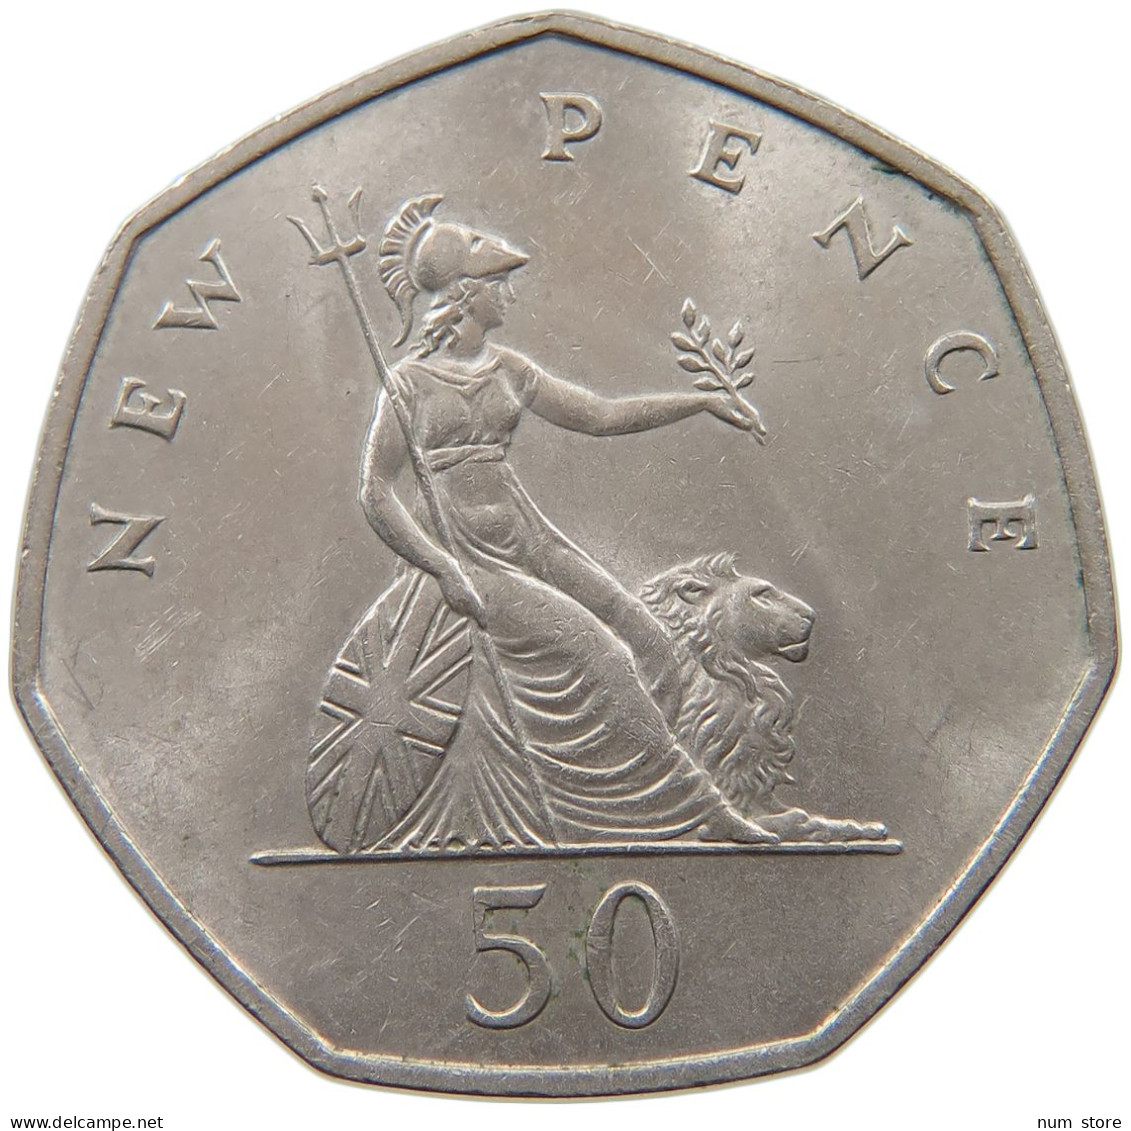 GREAT BRITAIN 50 PENCE 1969 #a030 0355 - 50 Pence